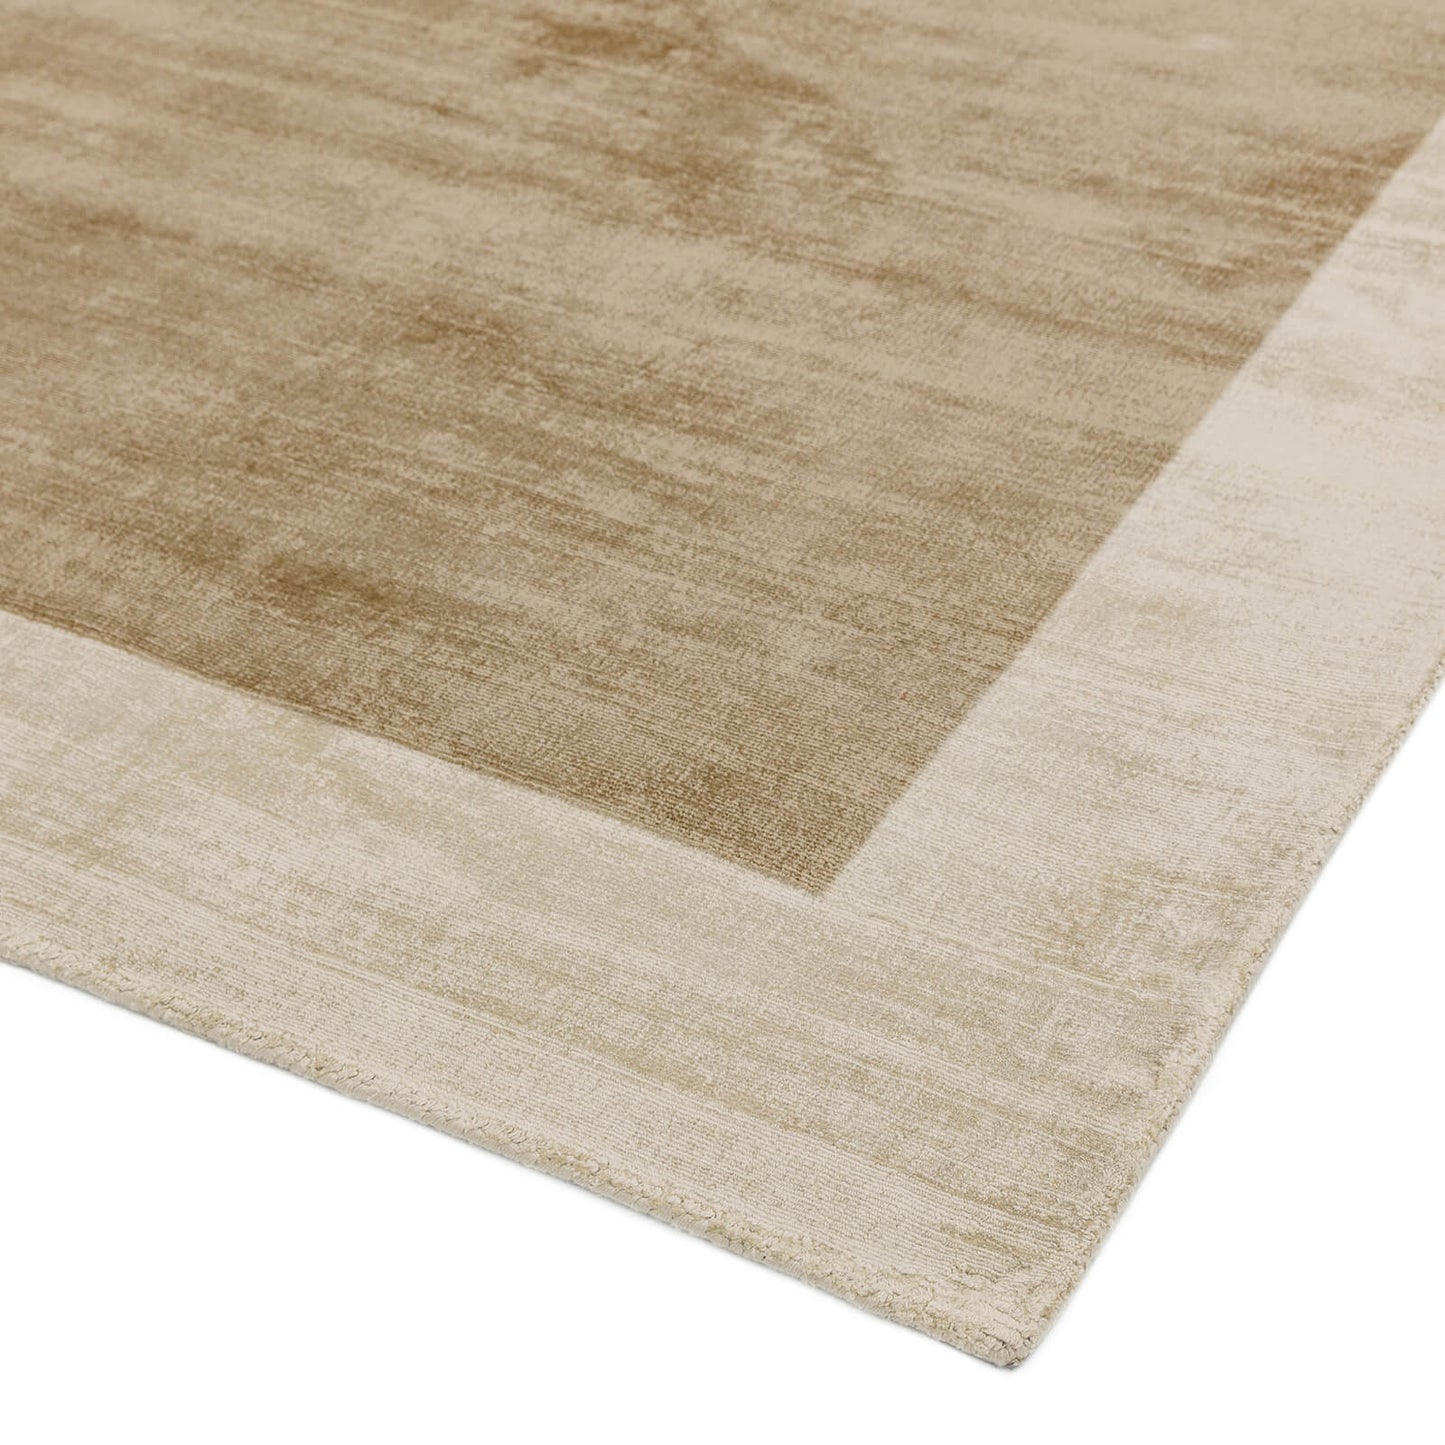 Asiatic Blade Border Putty / Champagne Rug